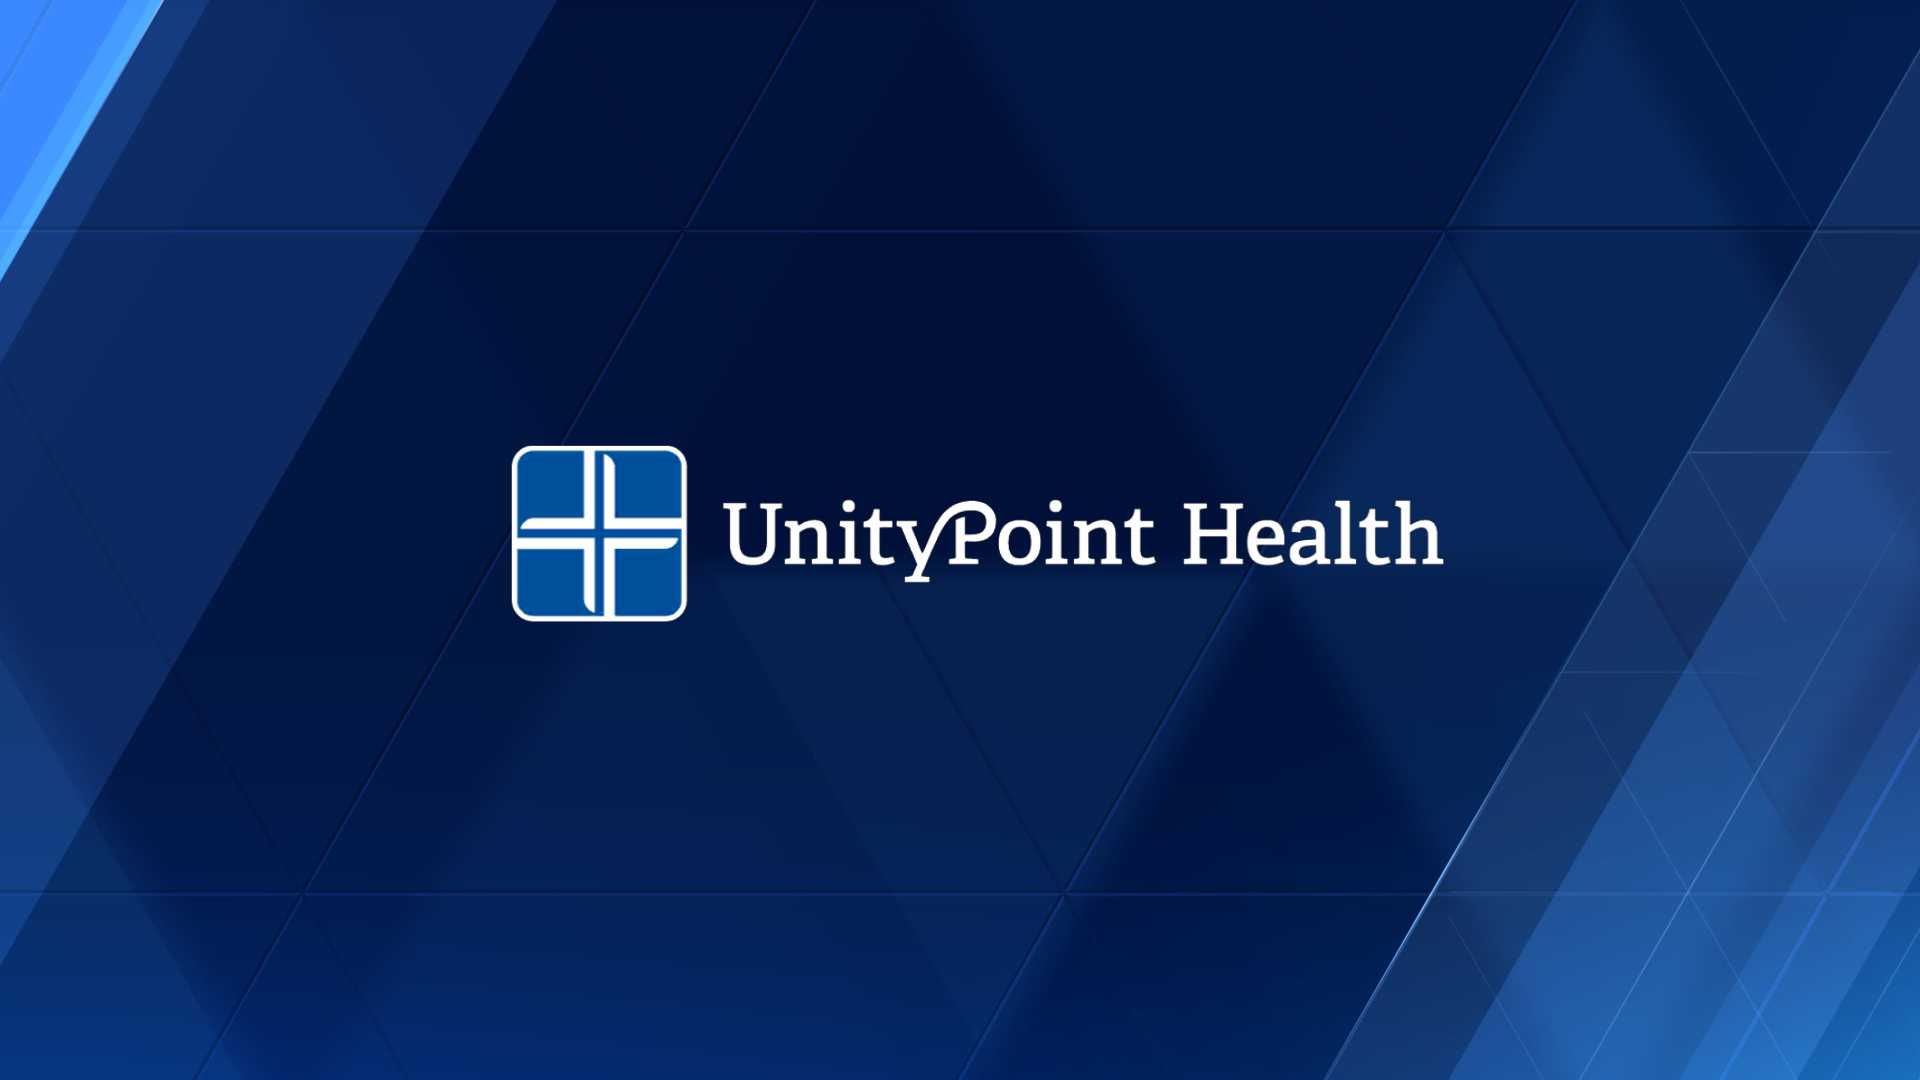 unity point health clnic coal valley